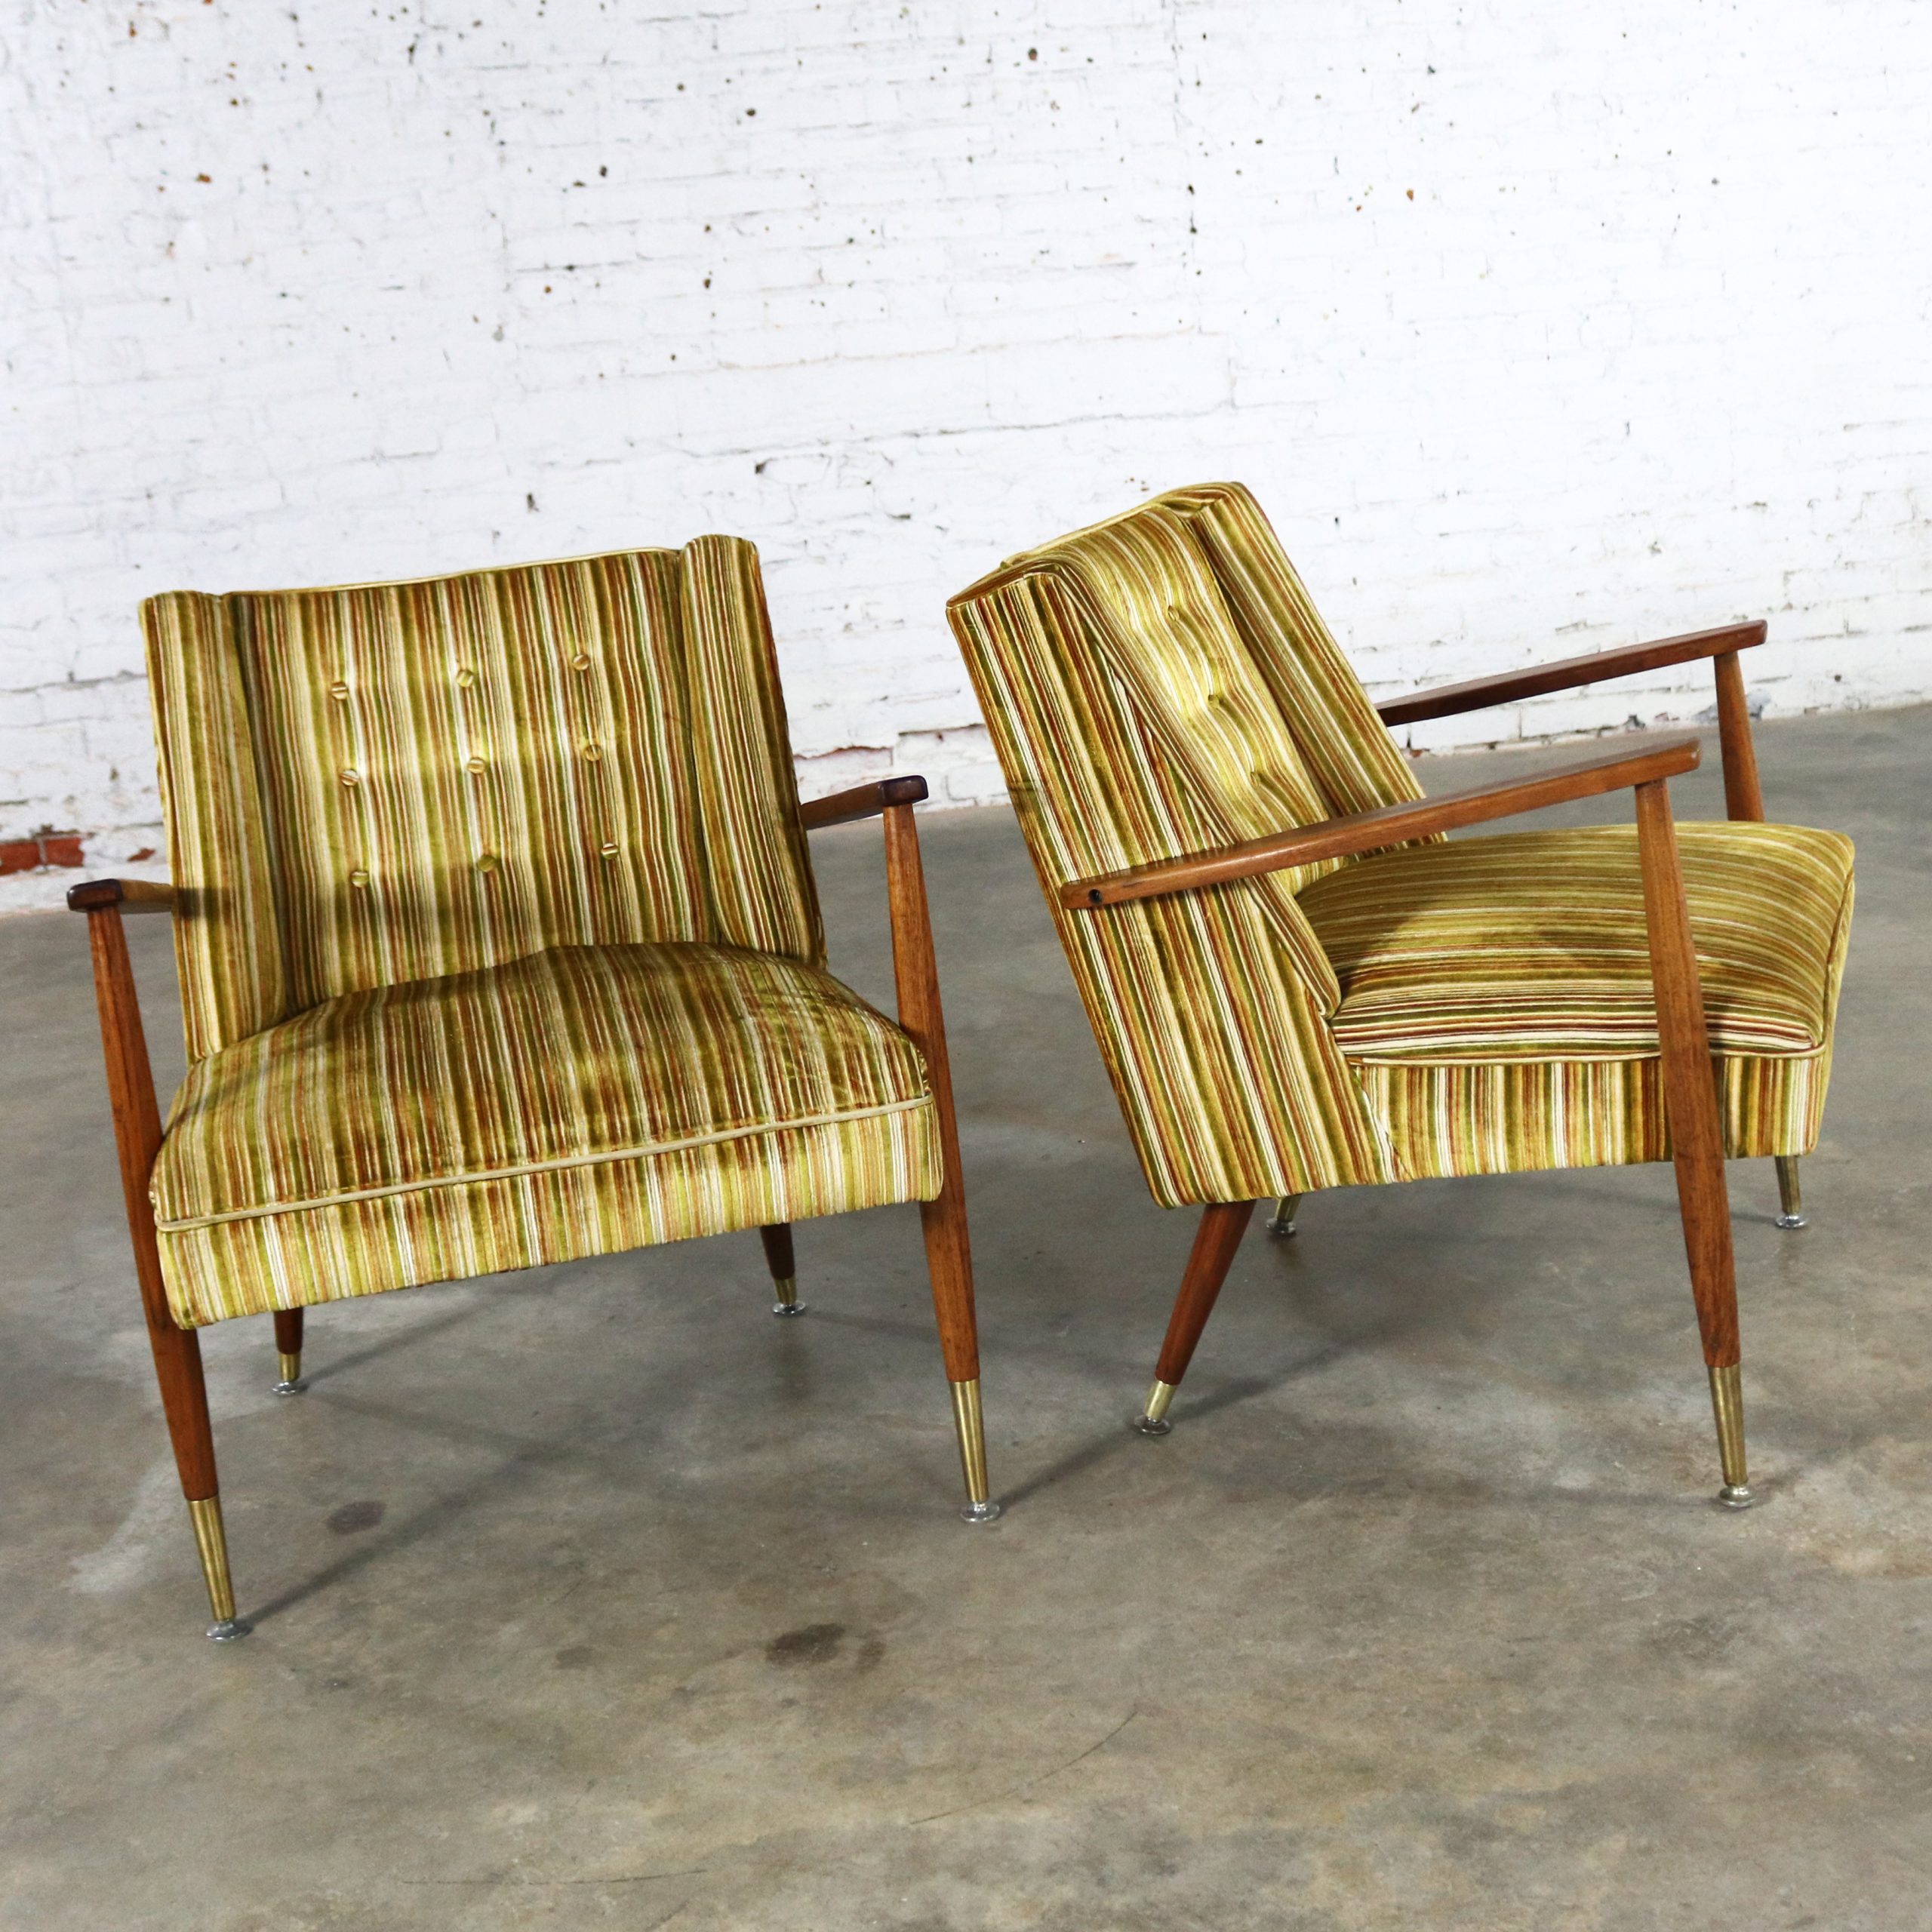 Mid Century Modern Pair of Lounge Chairs with Teak Arms & Legs & Brass Sabots